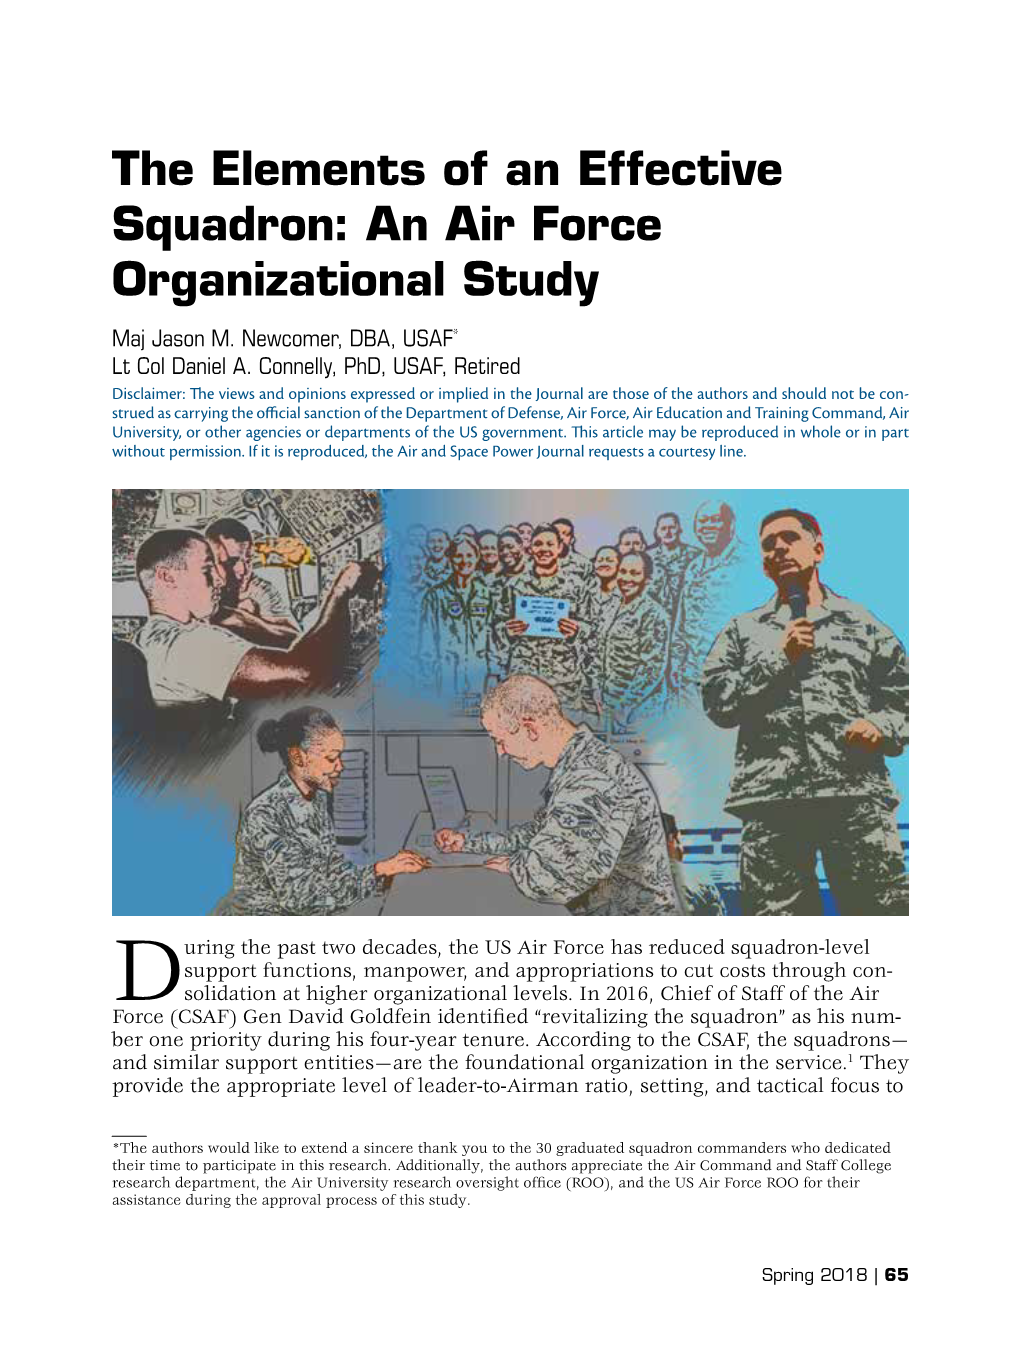 The Elements of an Effective Squadron: Air Force Organizational Study